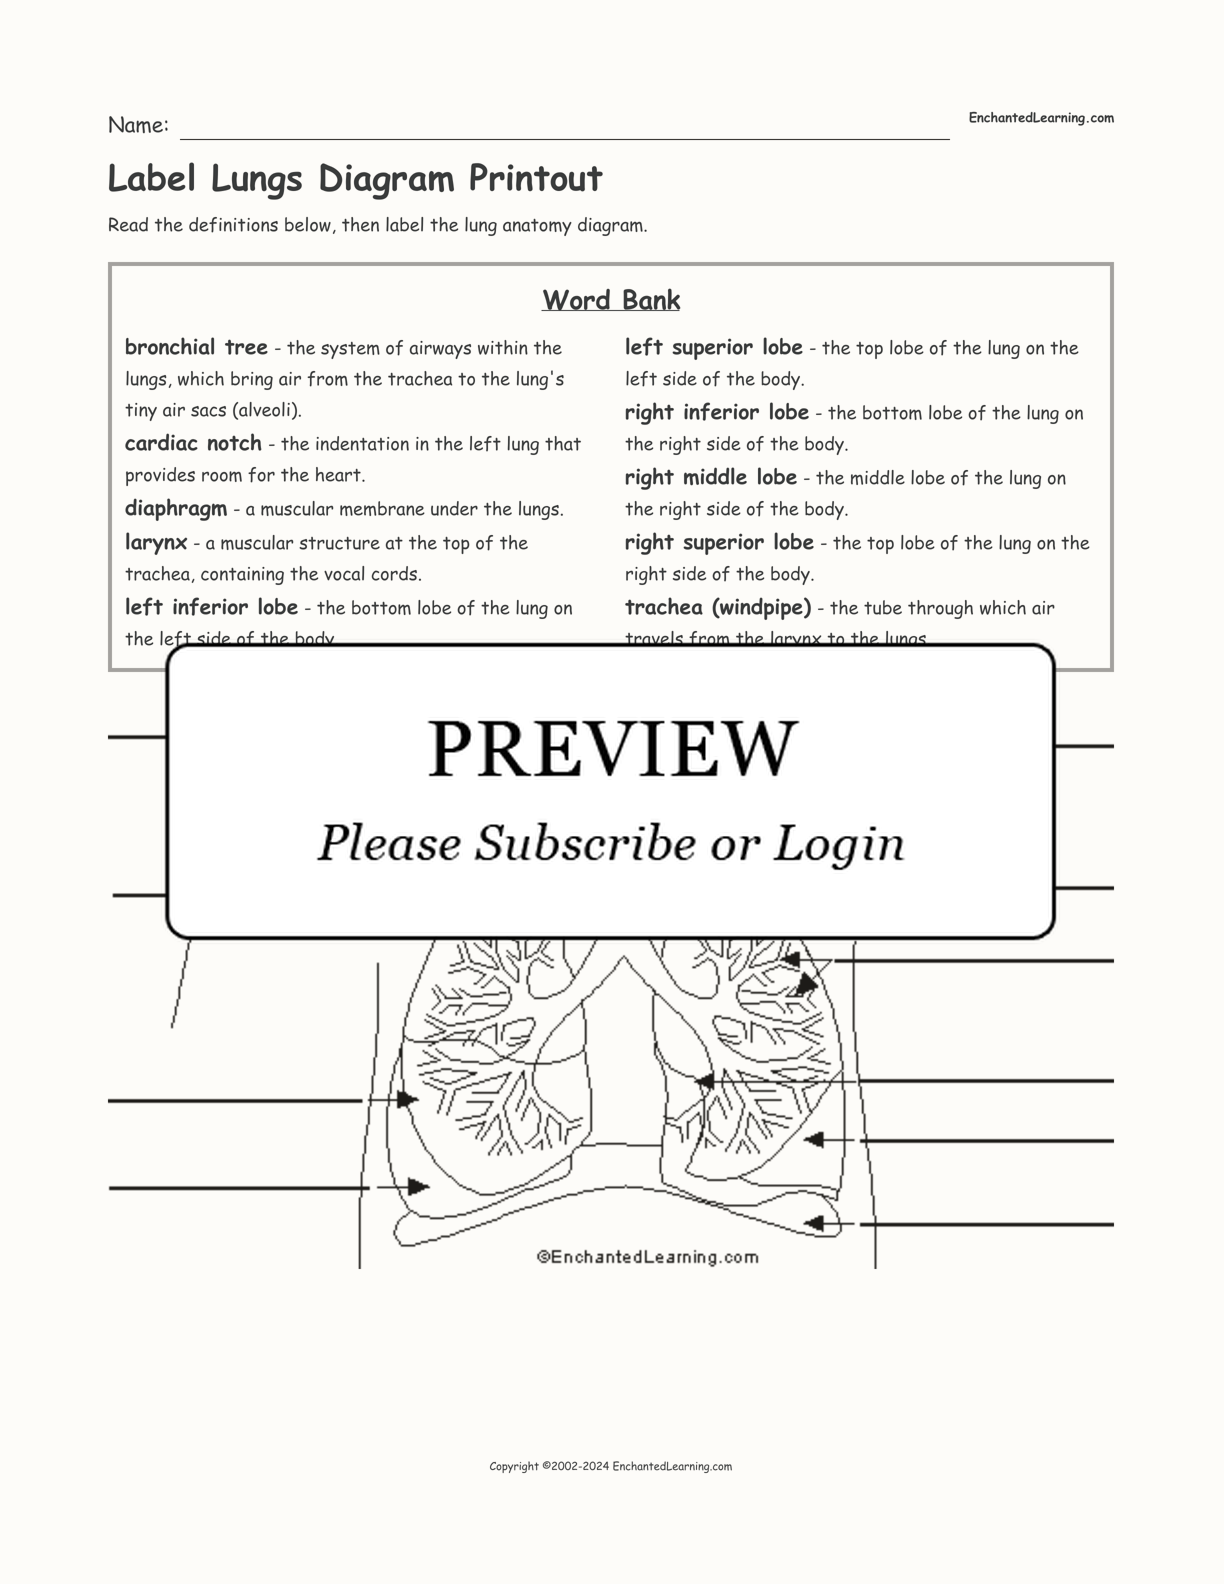 Label Lungs Diagram Printout interactive worksheet page 1